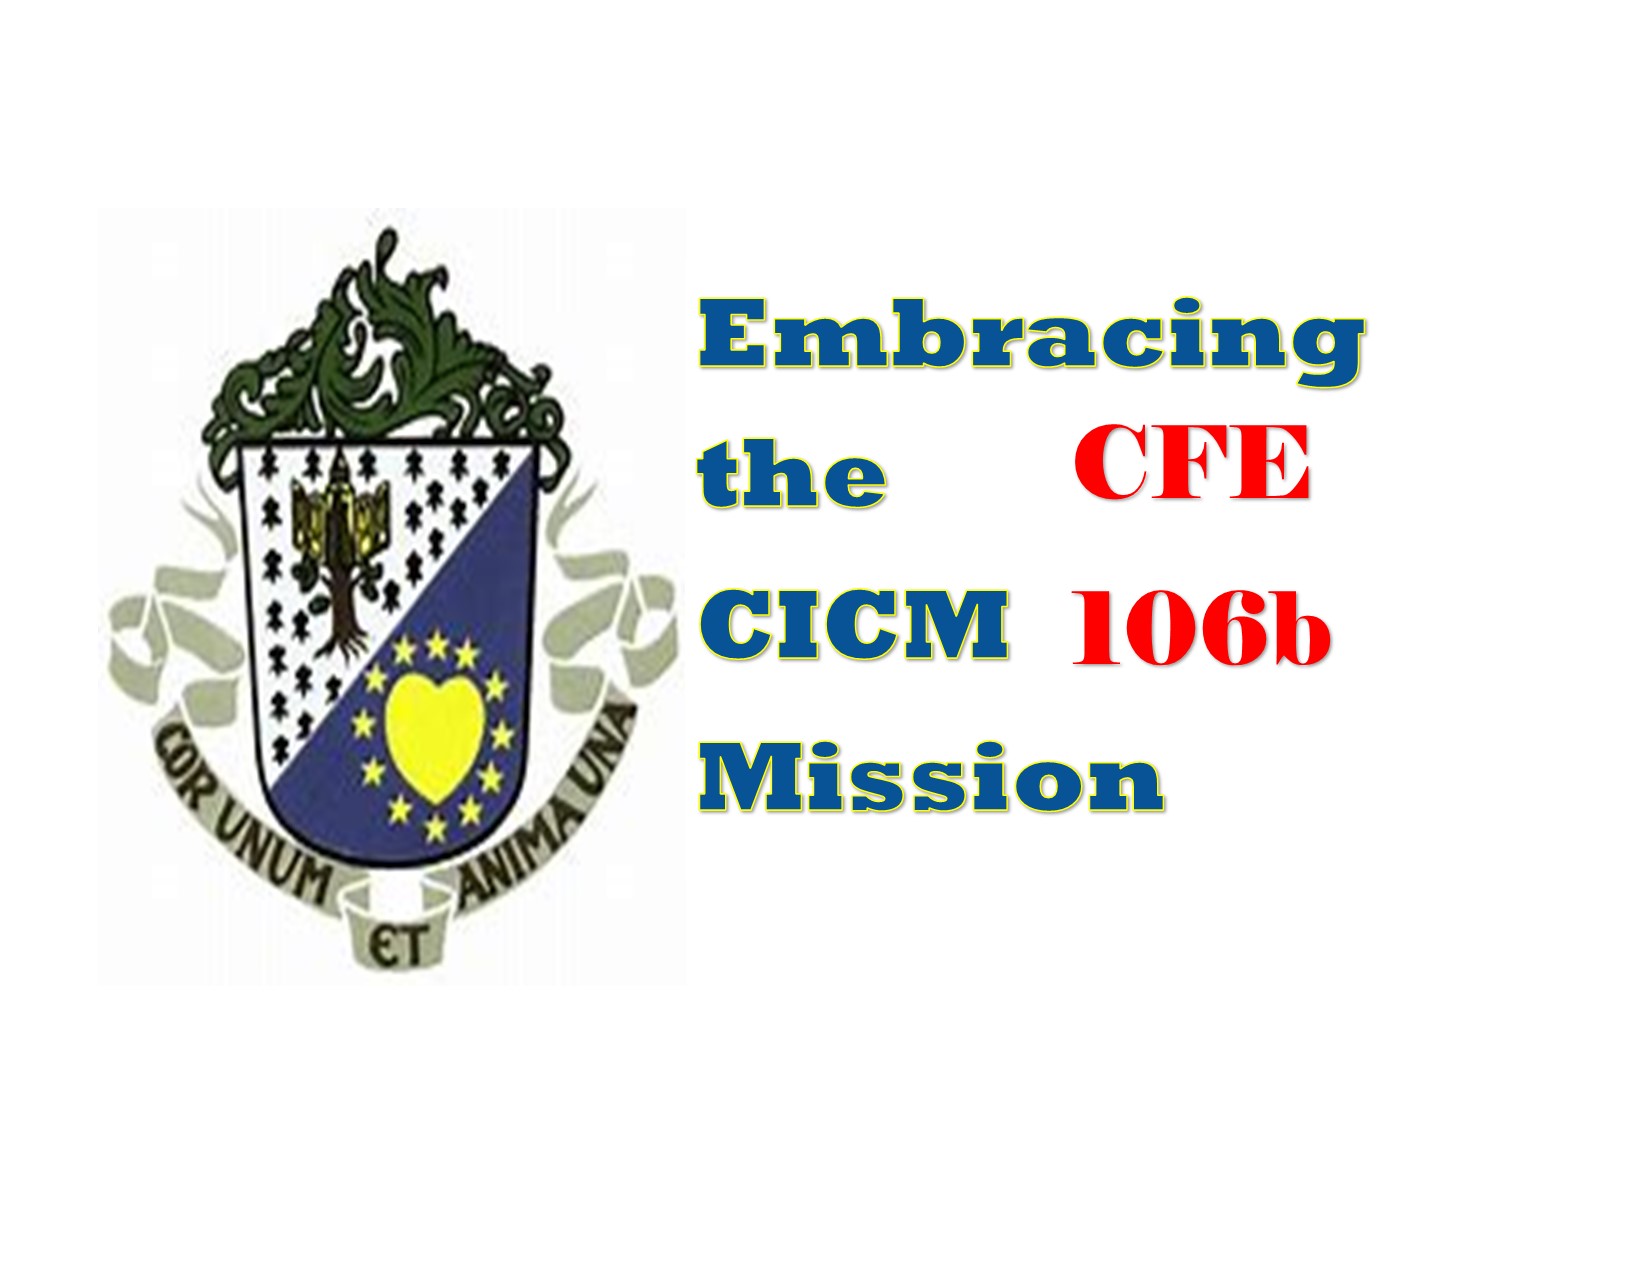 CFE 106b [3093]Embracing the CICM Mission